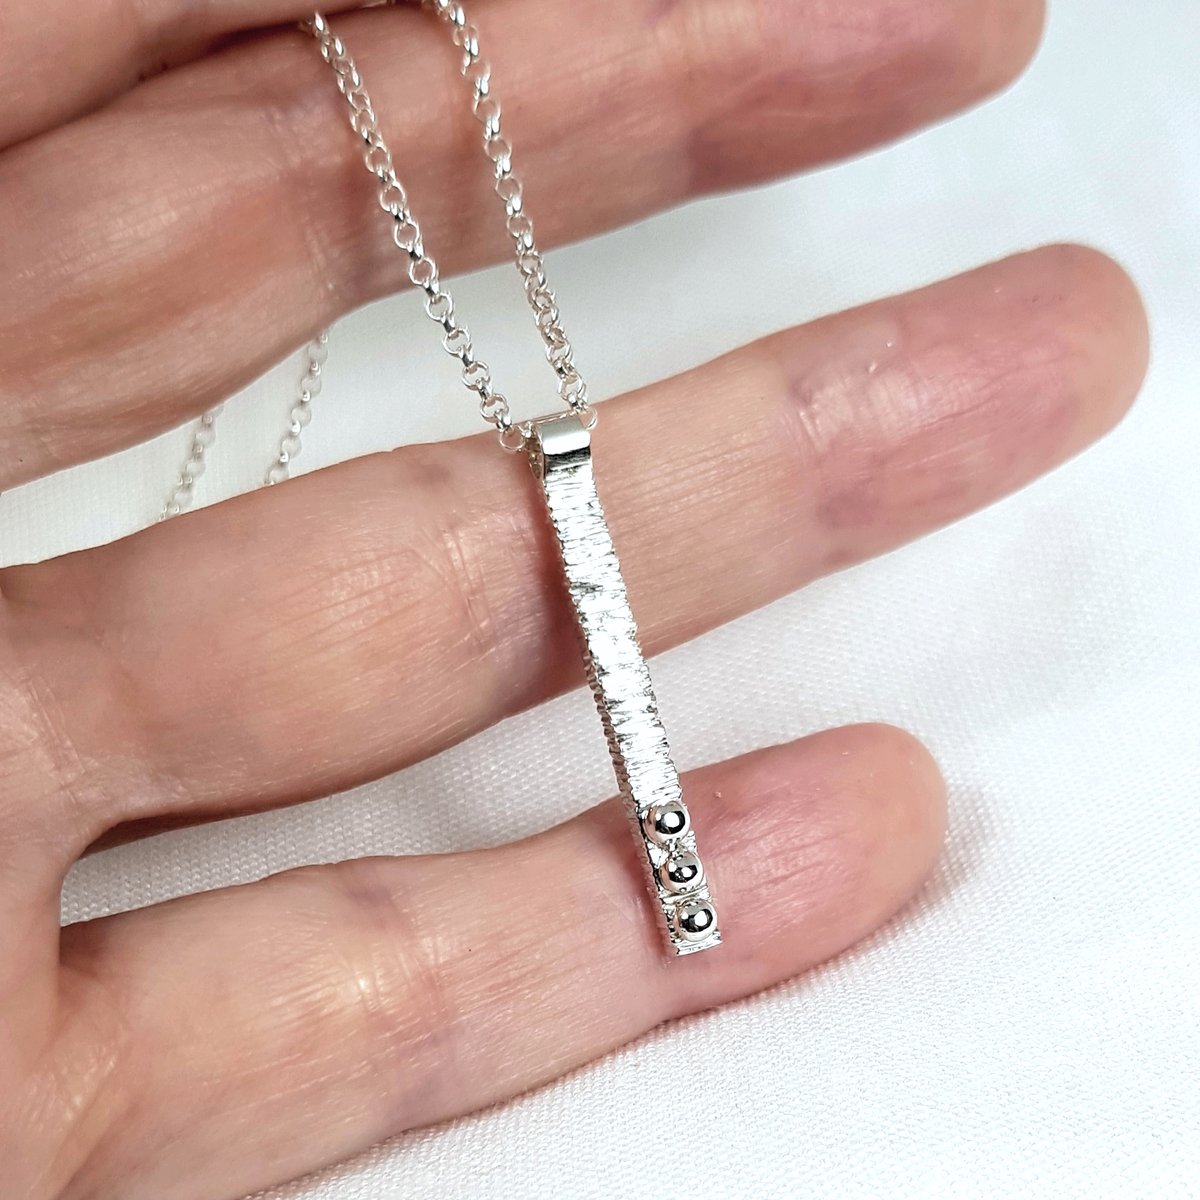 Image of Sterling Silver Bar Necklace, Contemporary Minimalist Pendant Necklace